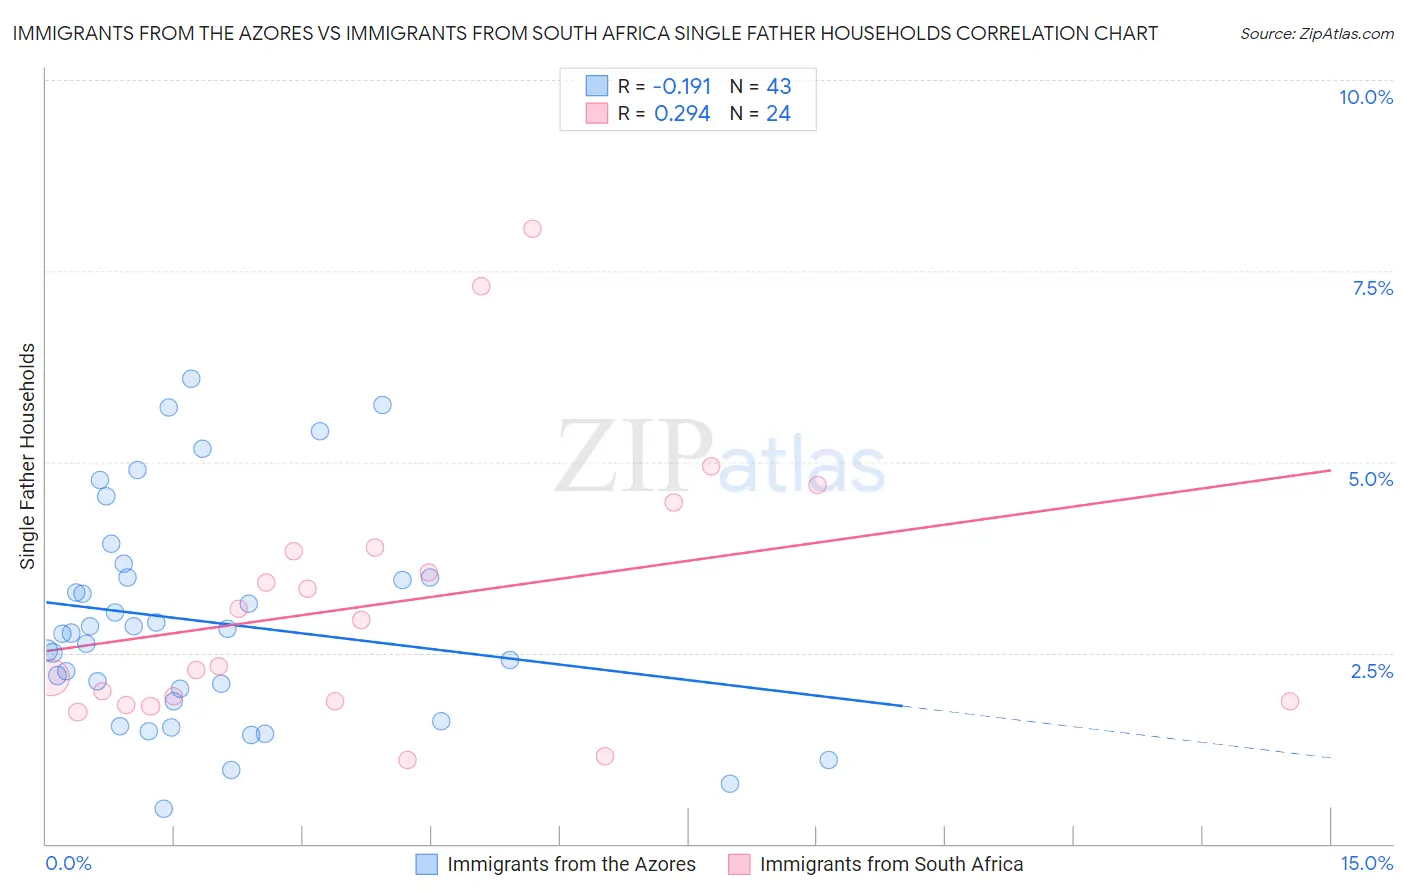 Immigrants from the Azores vs Immigrants from South Africa Single Father Households